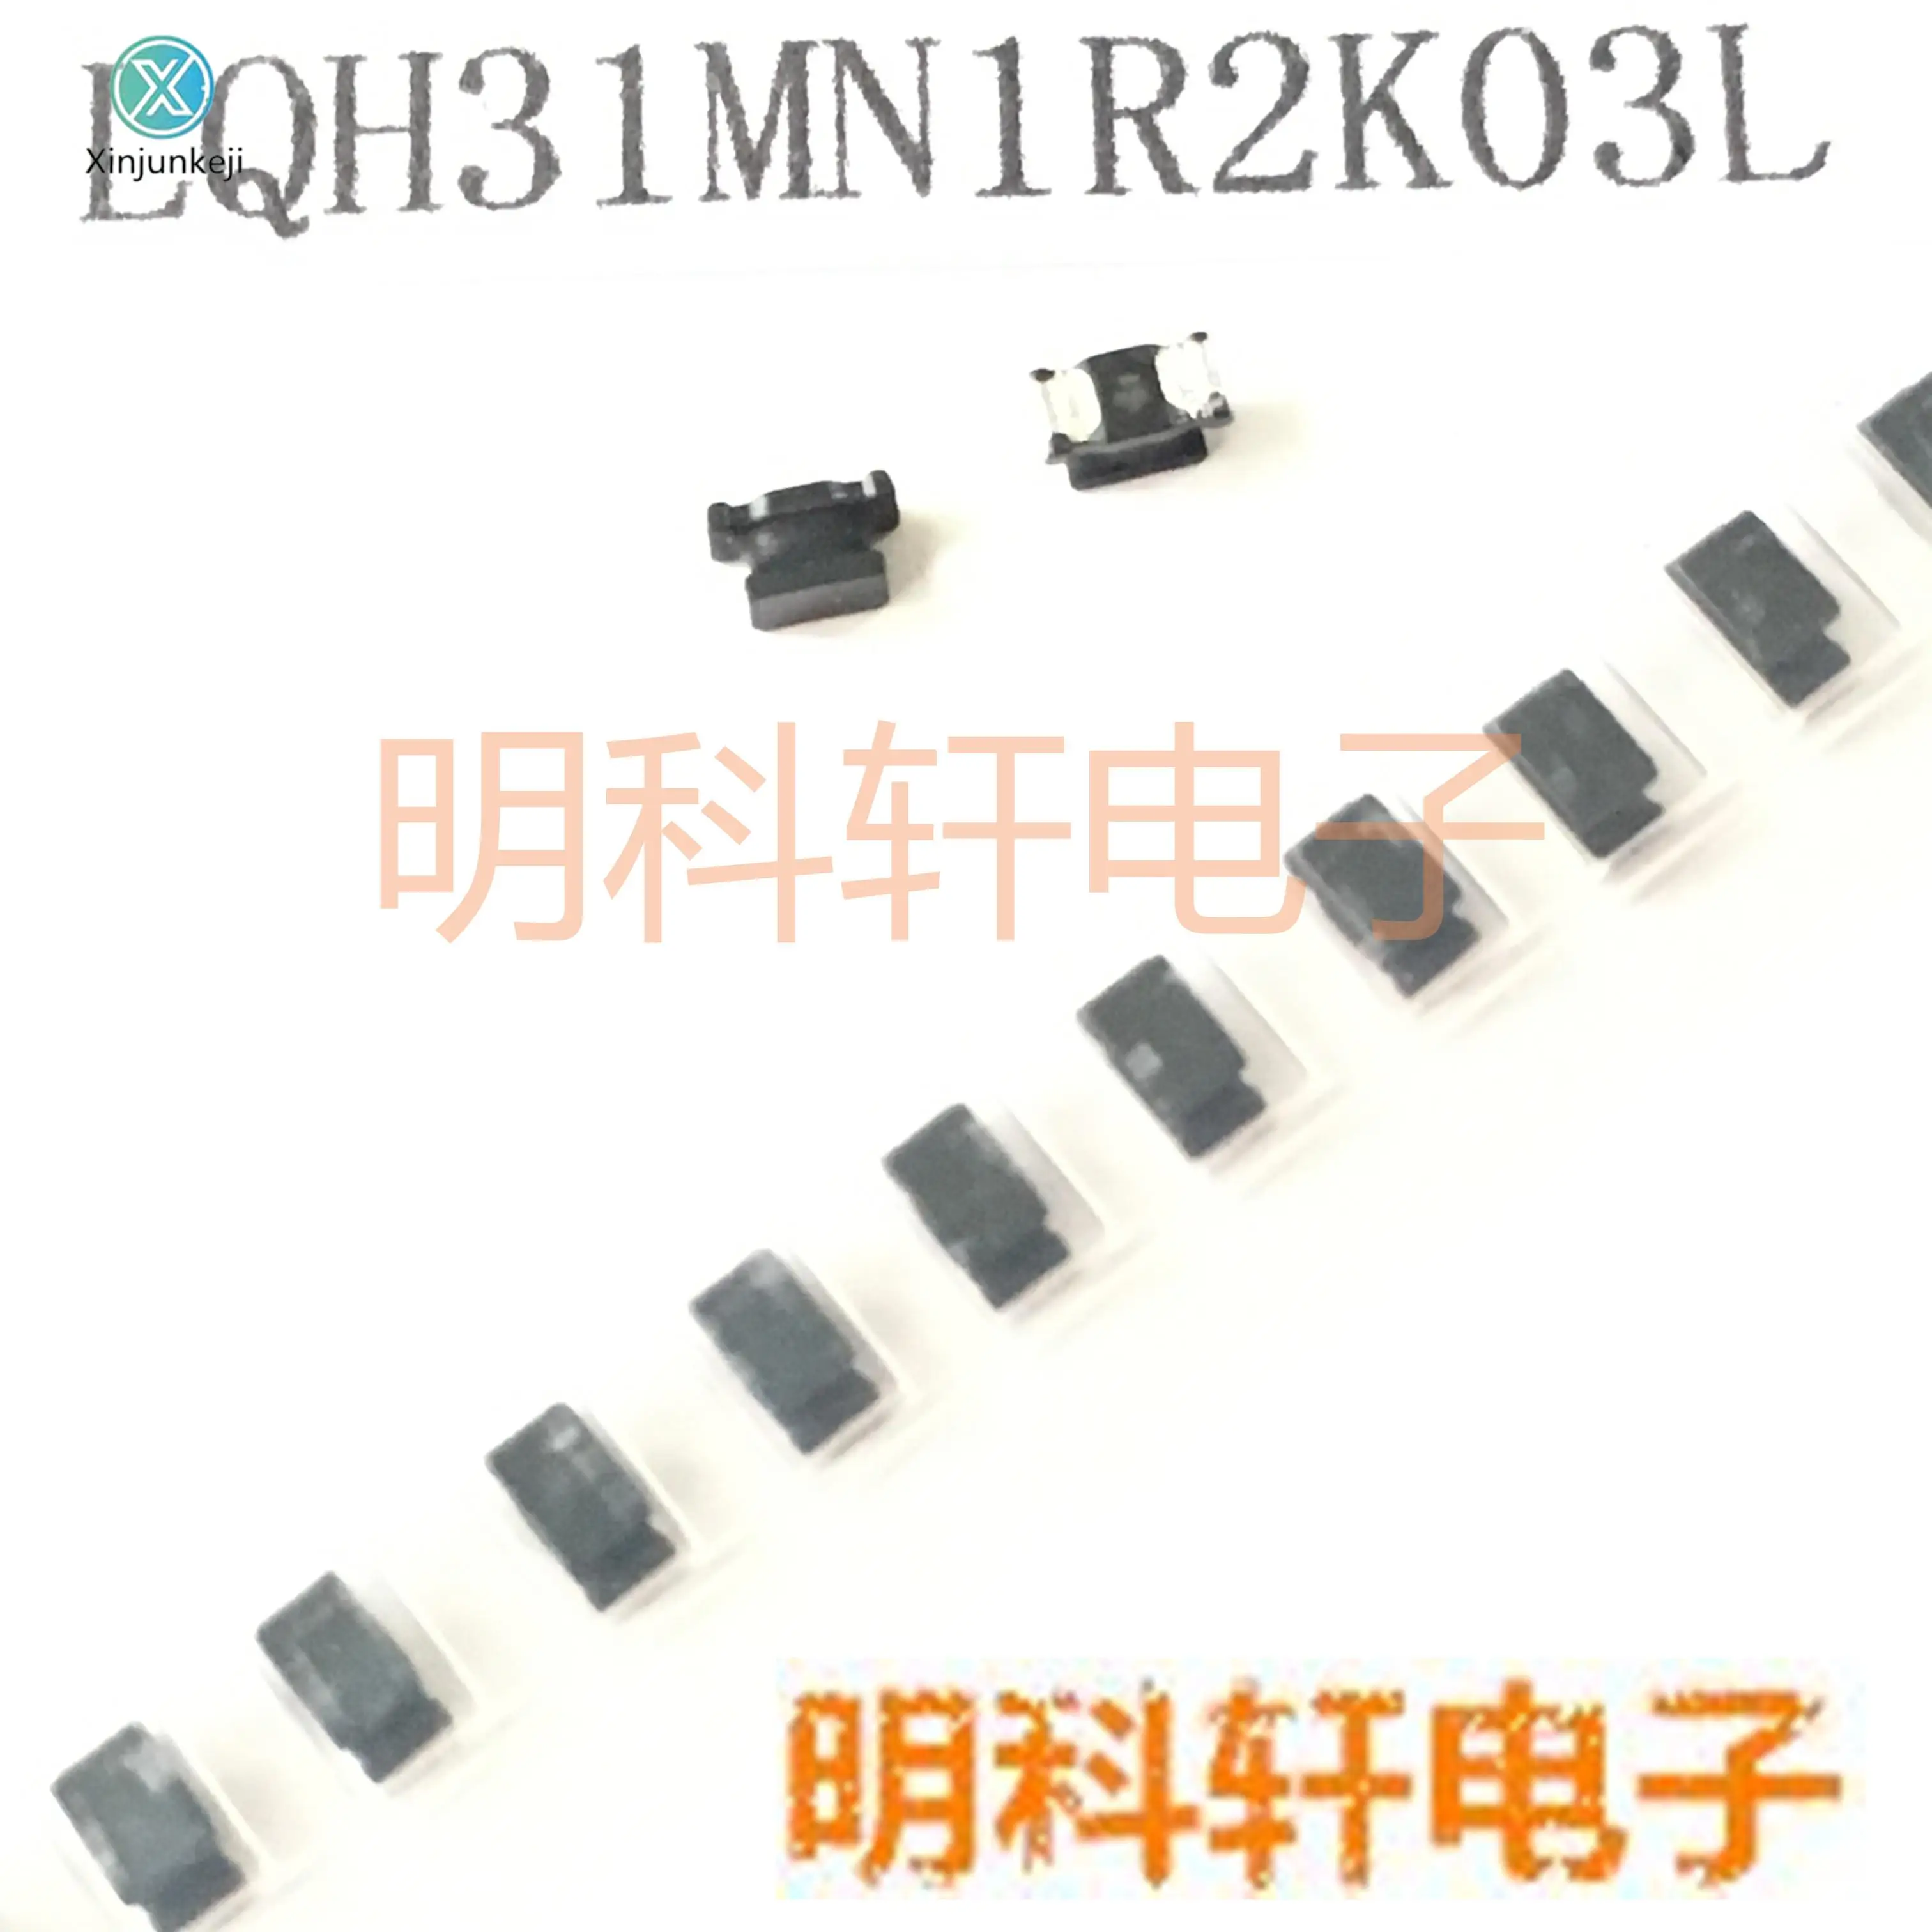 

30pcs orginal new LQH31MN1R2K03L SMD I-shaped wire wound inductor 1206 1.2UH ±10%